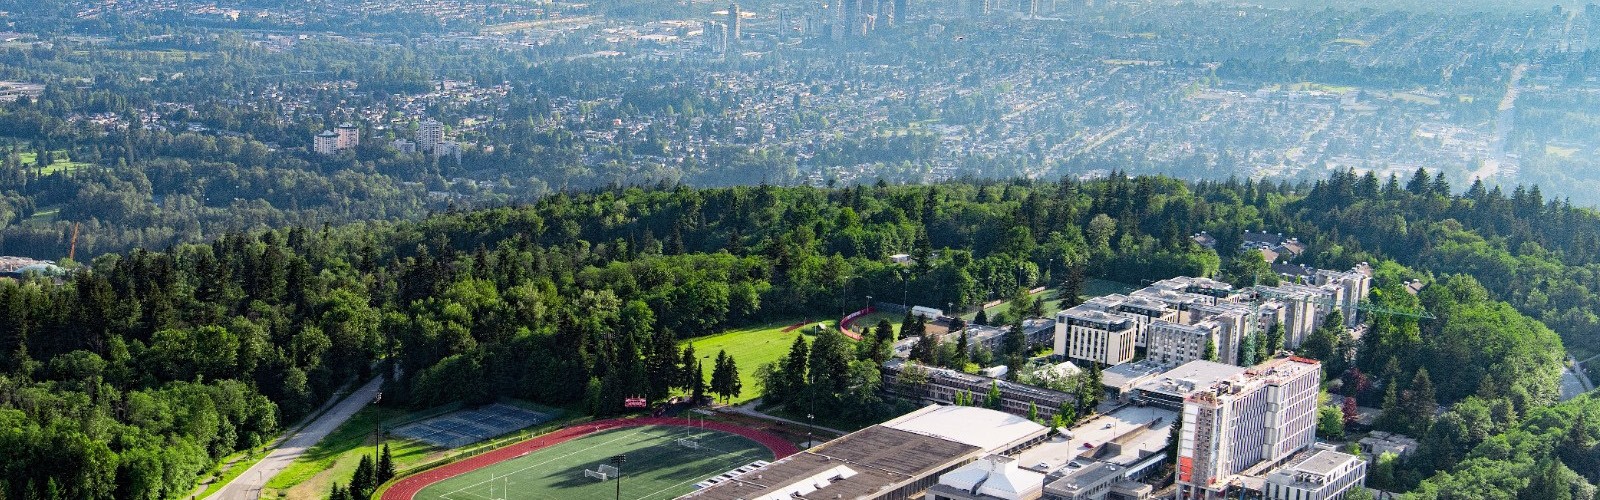 SFU aerial and view of lower mainland